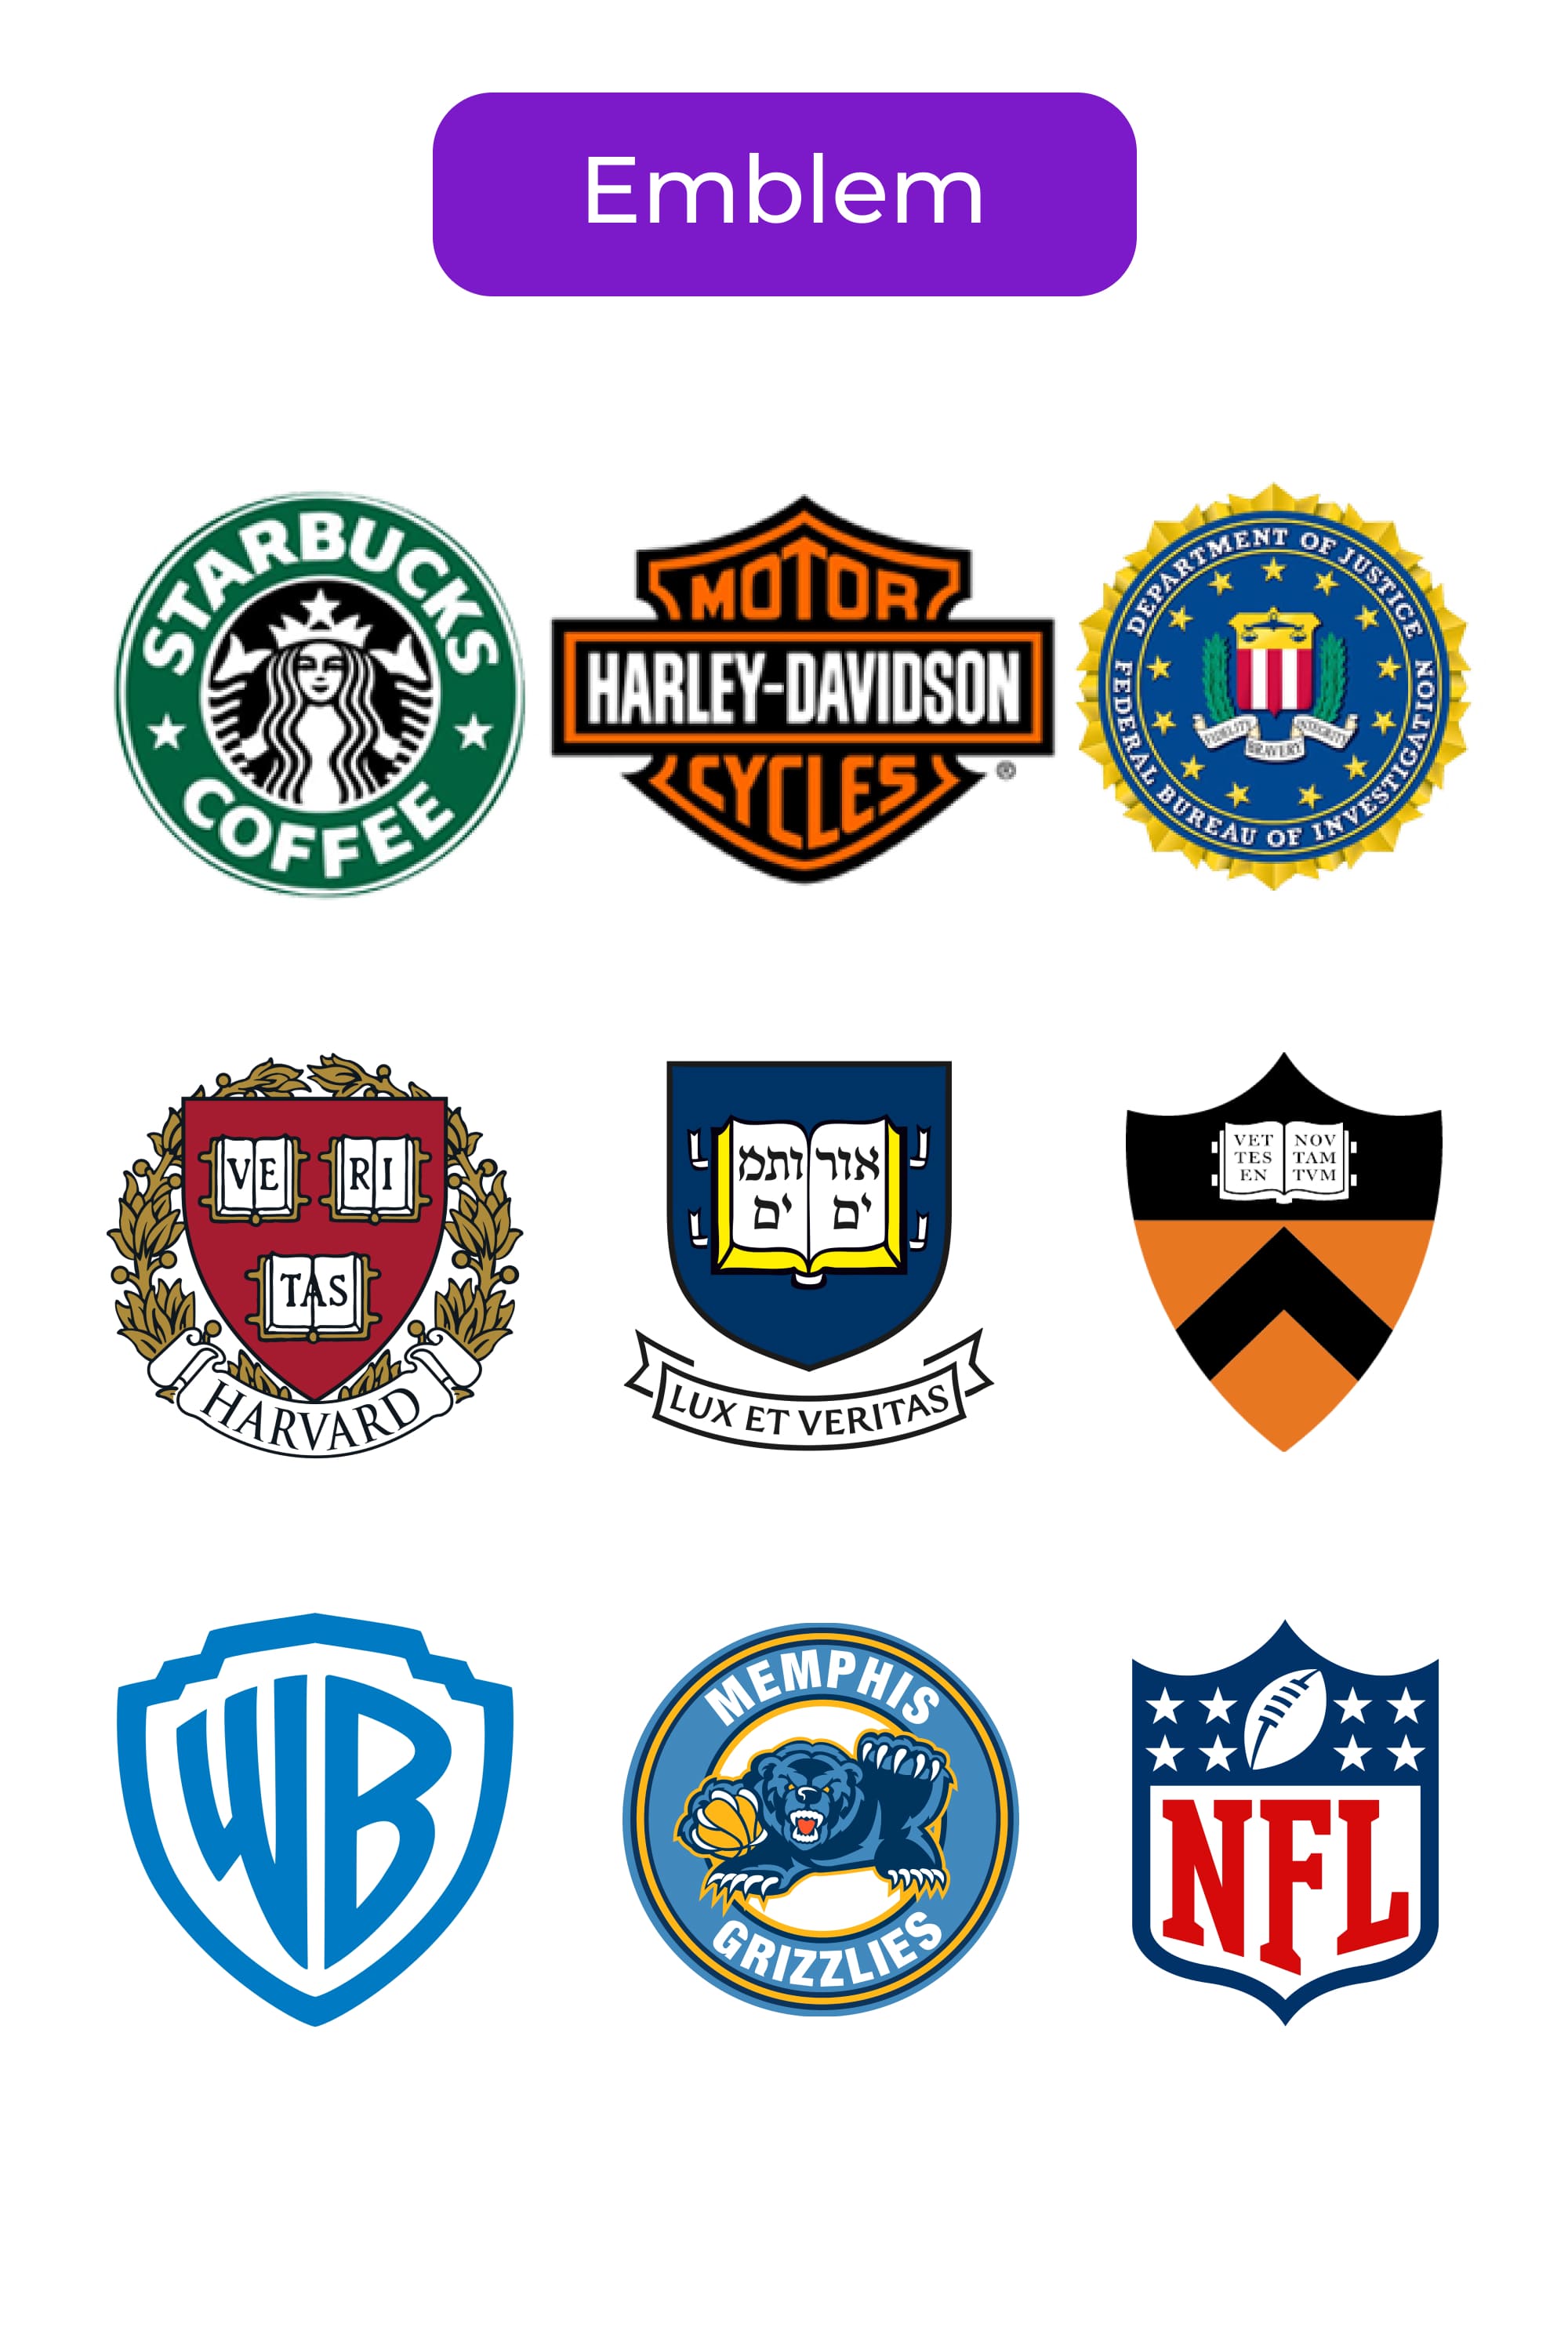 Collage of logos of famous brands in the form of emblems.